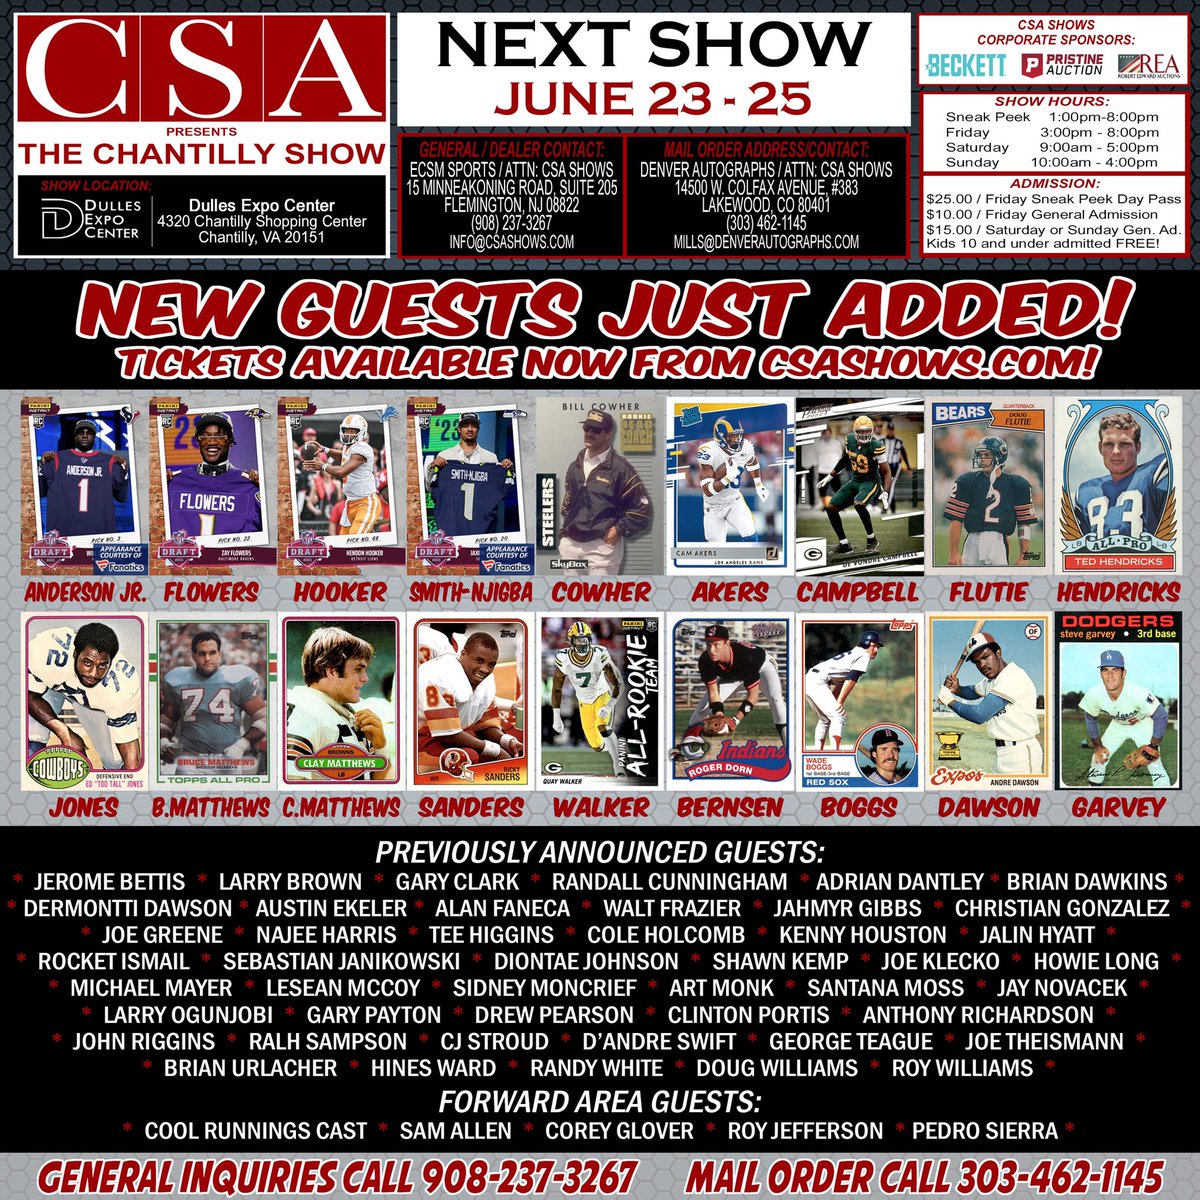 *New Guests Added!* Bill Cowher, Will Anderson Jr., Jaxon Smith-Njigba & Many More!

Tickets & VIP Packages Available Now!

#csashows #whodoyoucollect #thehobby #cardshow #cardshows #nfl #autographs #autographsigning